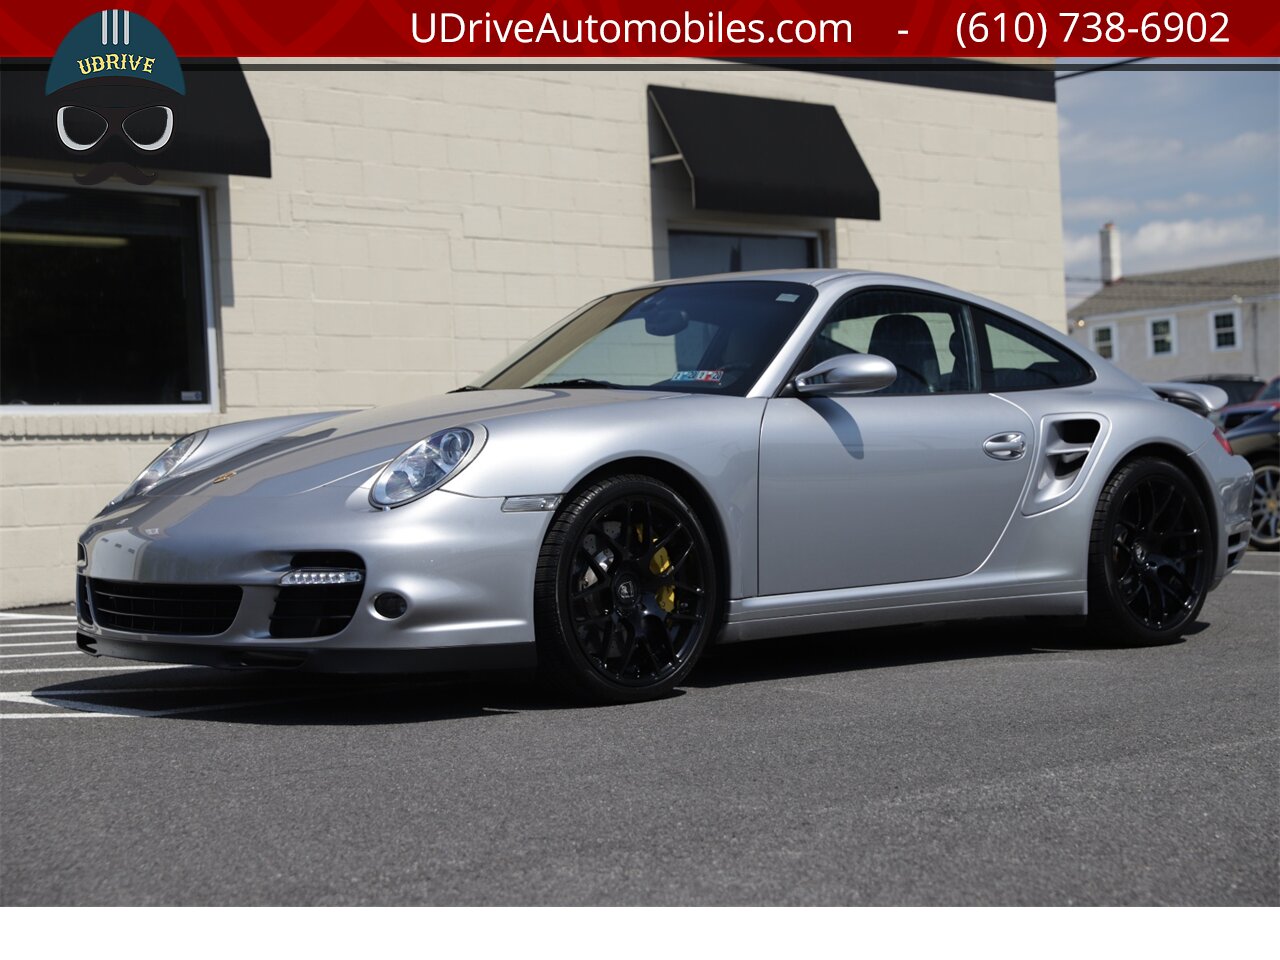 2008 Porsche 911 6 Speed Manual Turbo 997 PCCB's $149k MSRP   - Photo 9 - West Chester, PA 19382